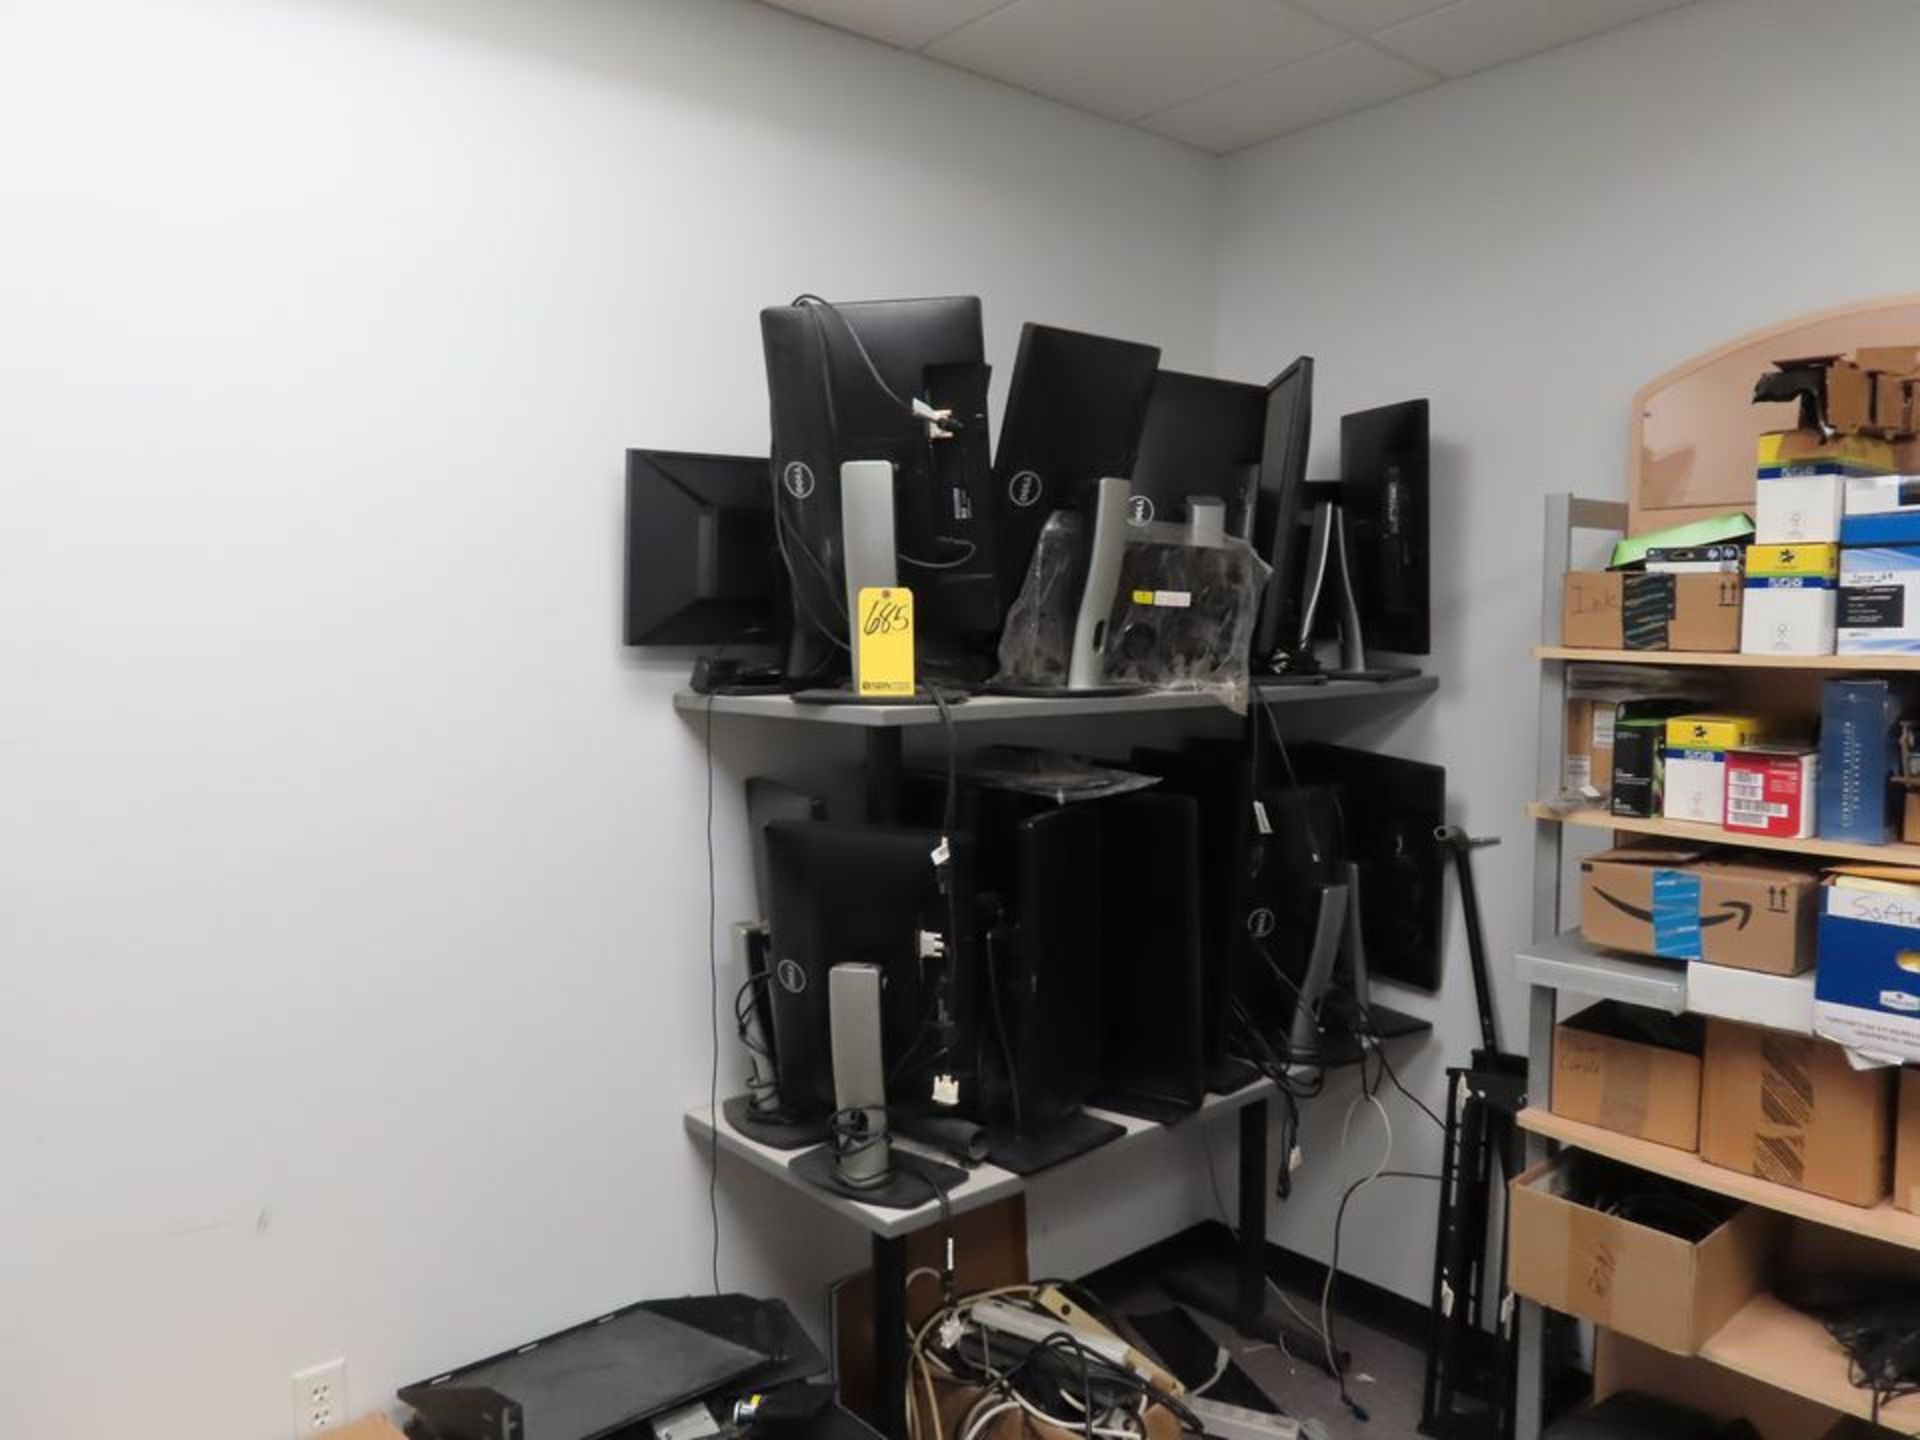 REMAINING CONTENTS OF ROOM - MONITORS, KEYBOARDS, PRINTERS, MISC. COMPUTER SUPPLIES & COMPONENTS